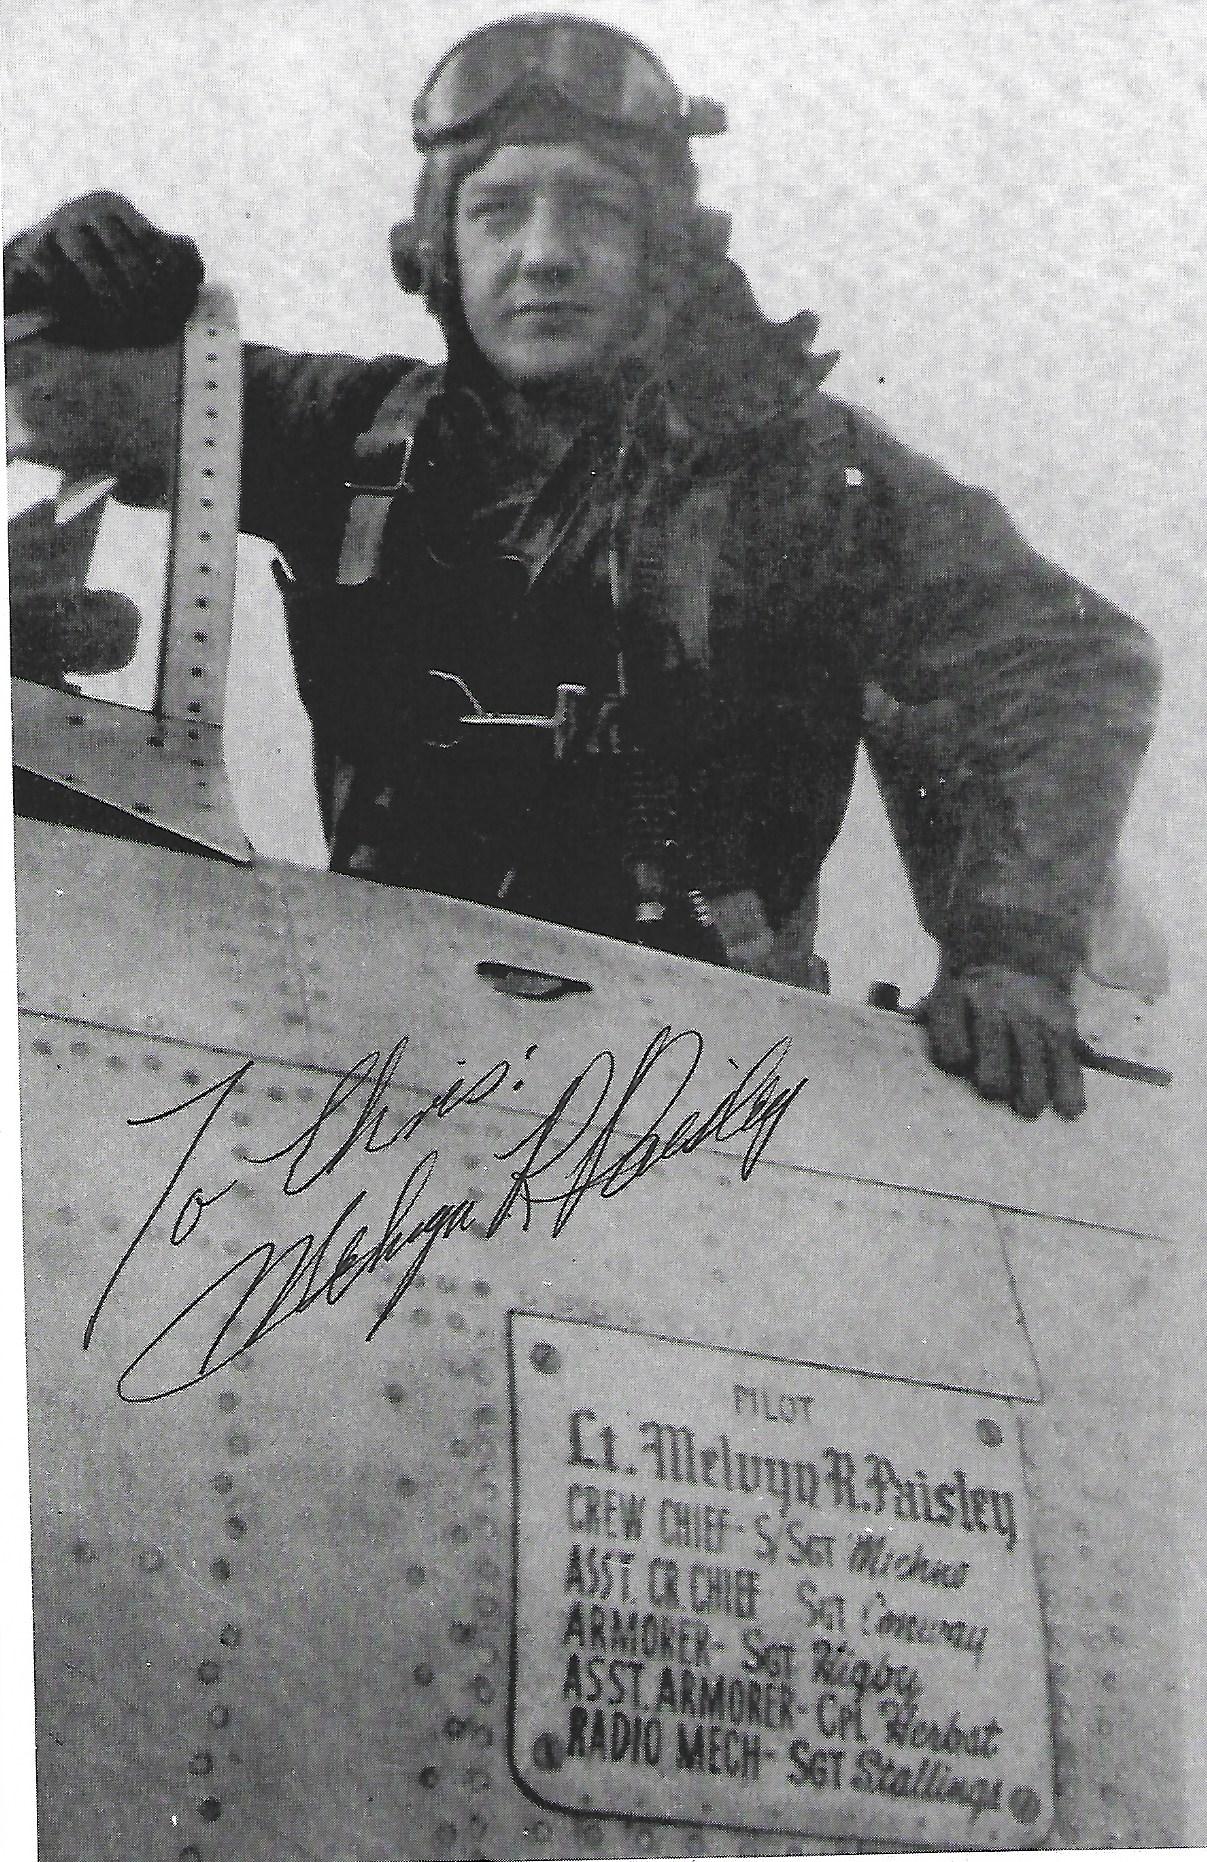 1st Lt. Melvyn R. Paisley, a fighter pilot with the 366th Fighter Group, 390th Fighter Squadron, 9th Air Force during World War II. (American Air Museum in Britain)